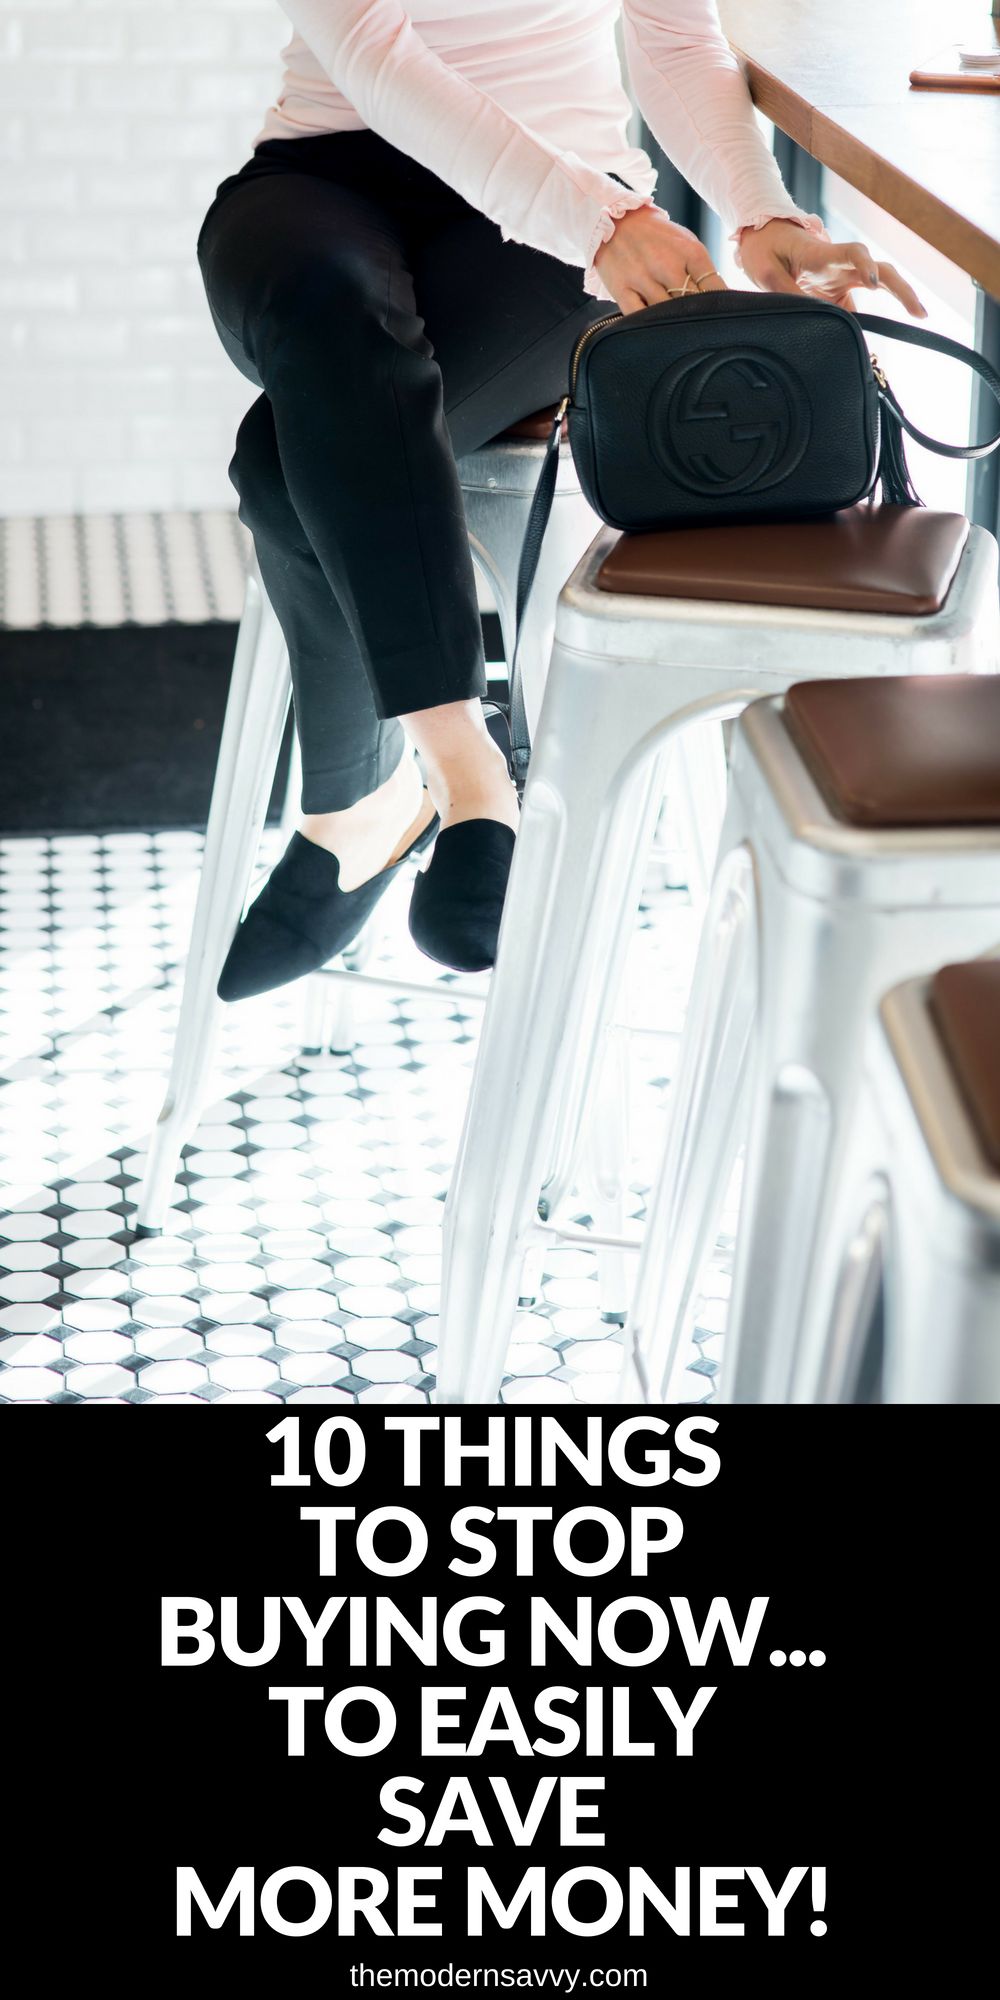 10 Things You Can Stop Buying Now... so you can easily save more money - 10 Things to Stop Buying to Save Money featured by popular Florida lifestyle blogger, The Modern Savvy